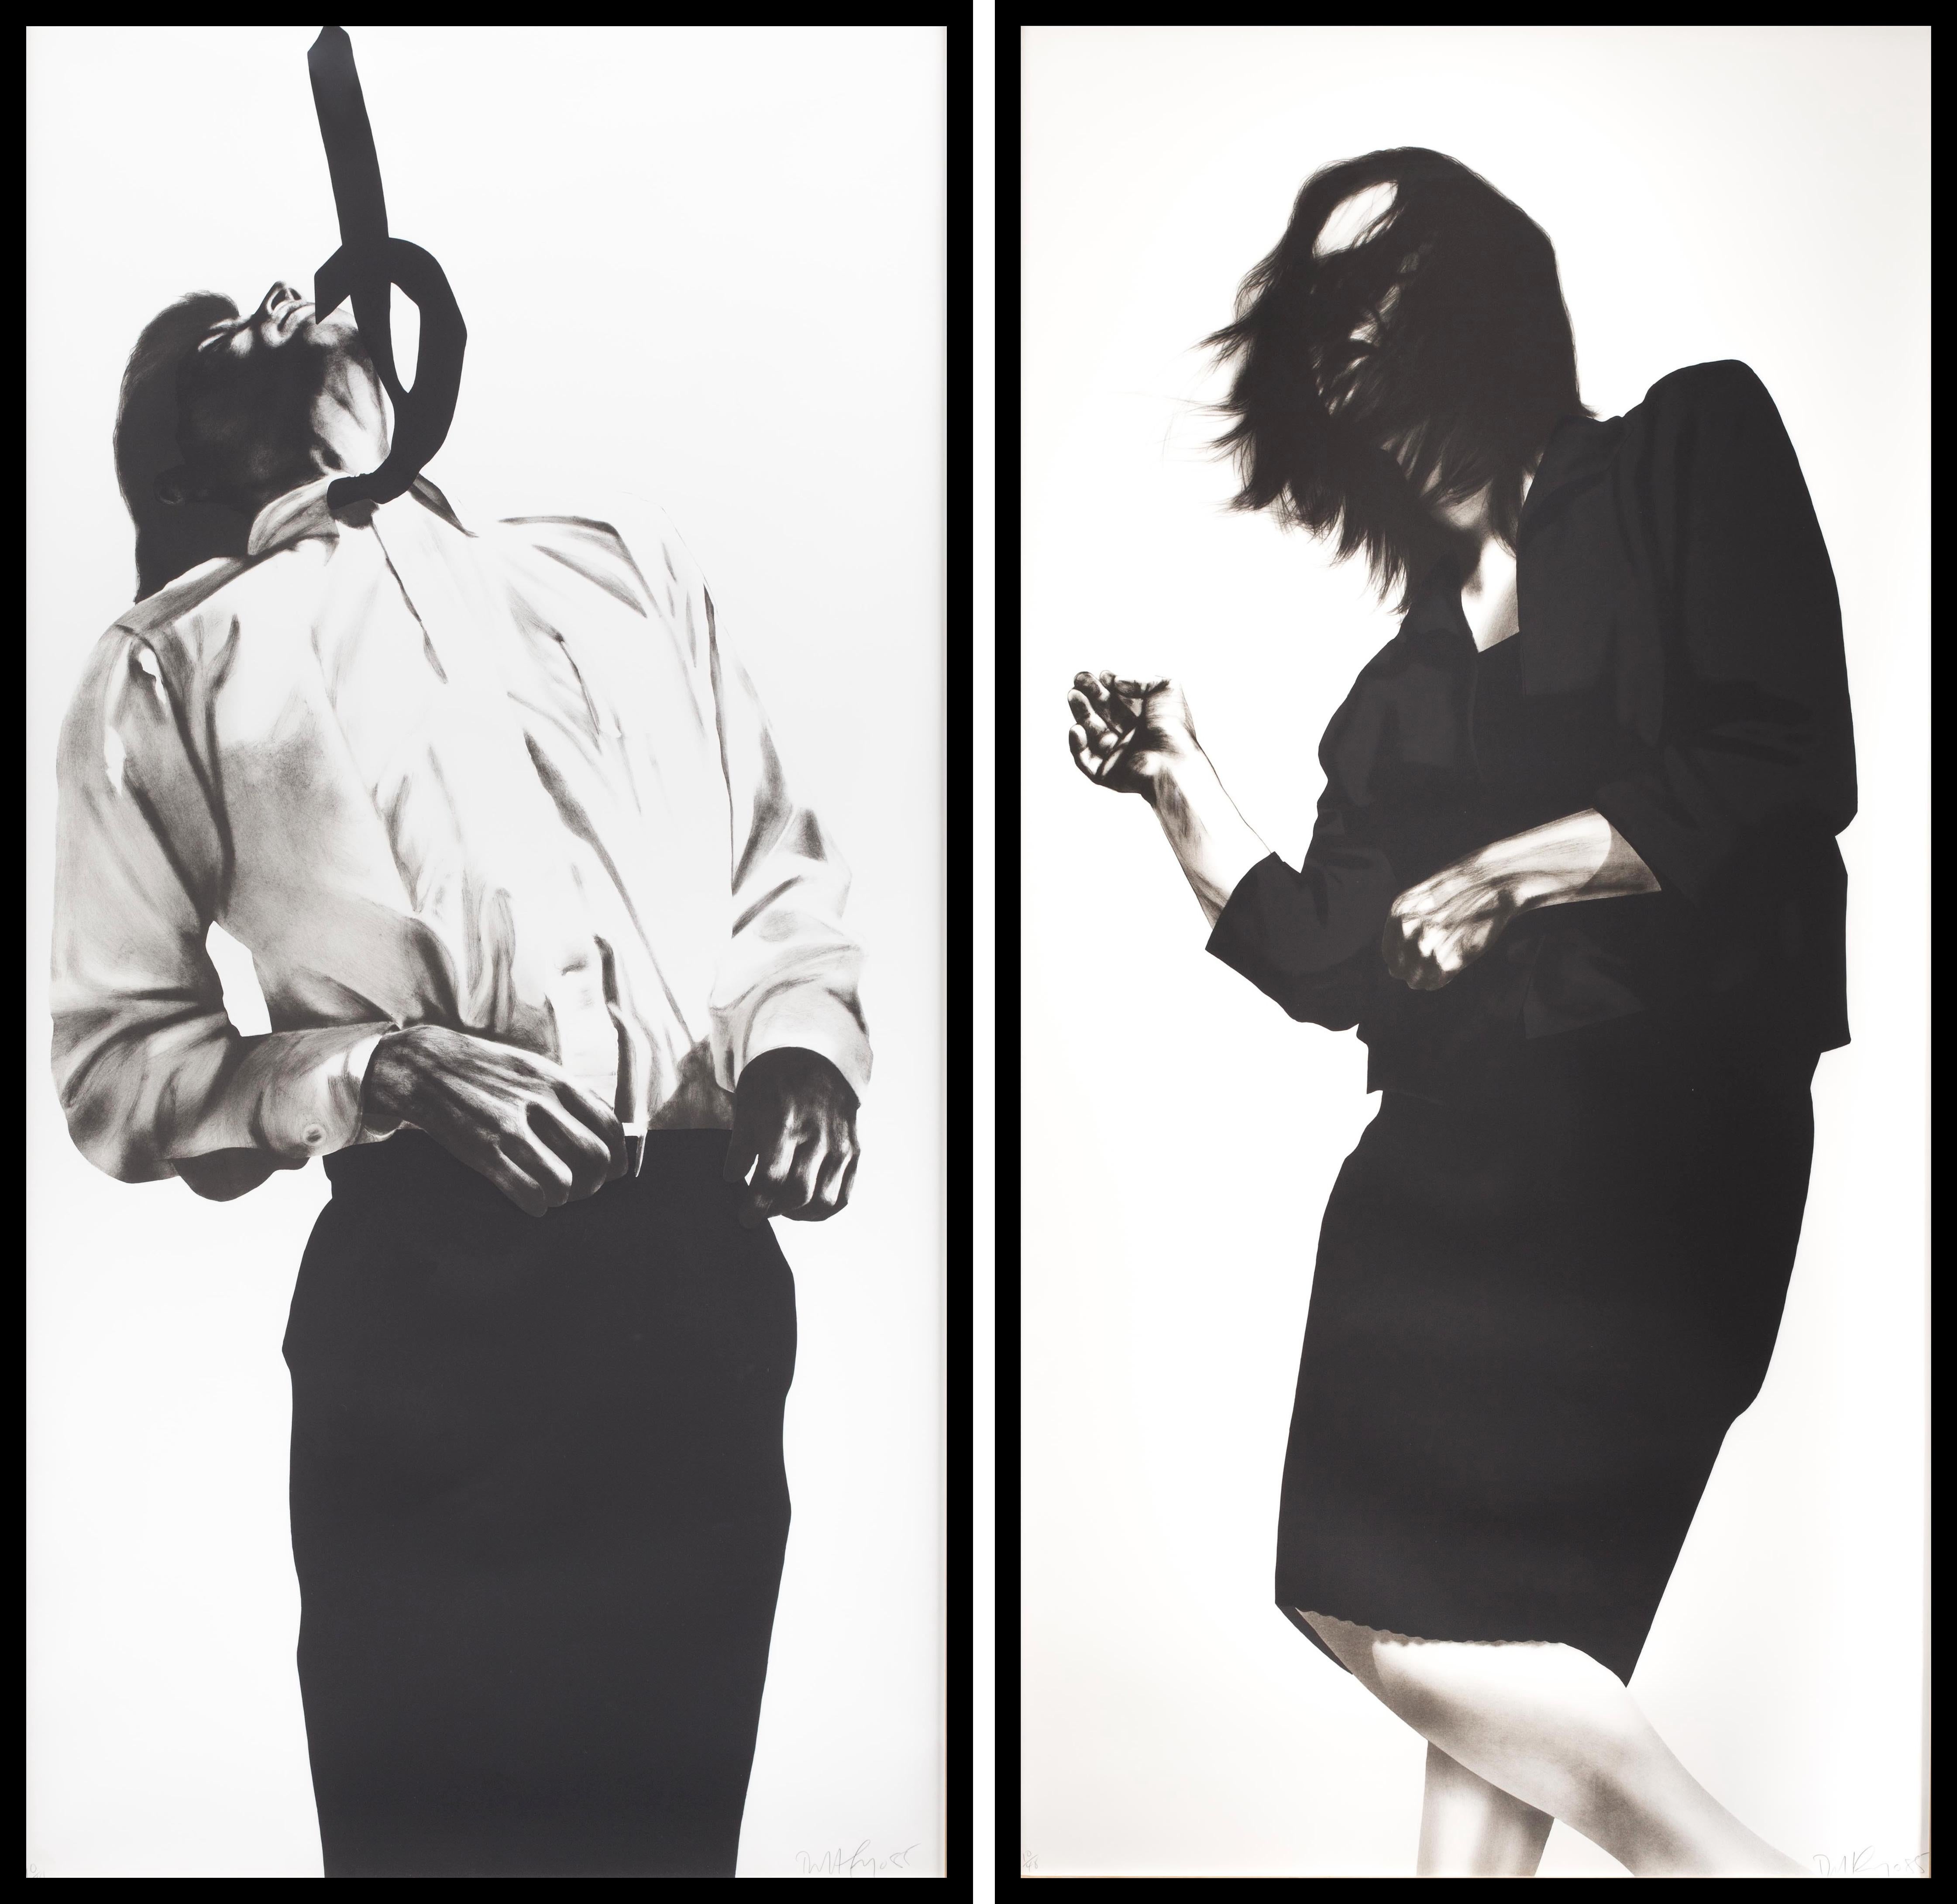 Gretchen & Eric from Men in the Cities - Print by Robert Longo